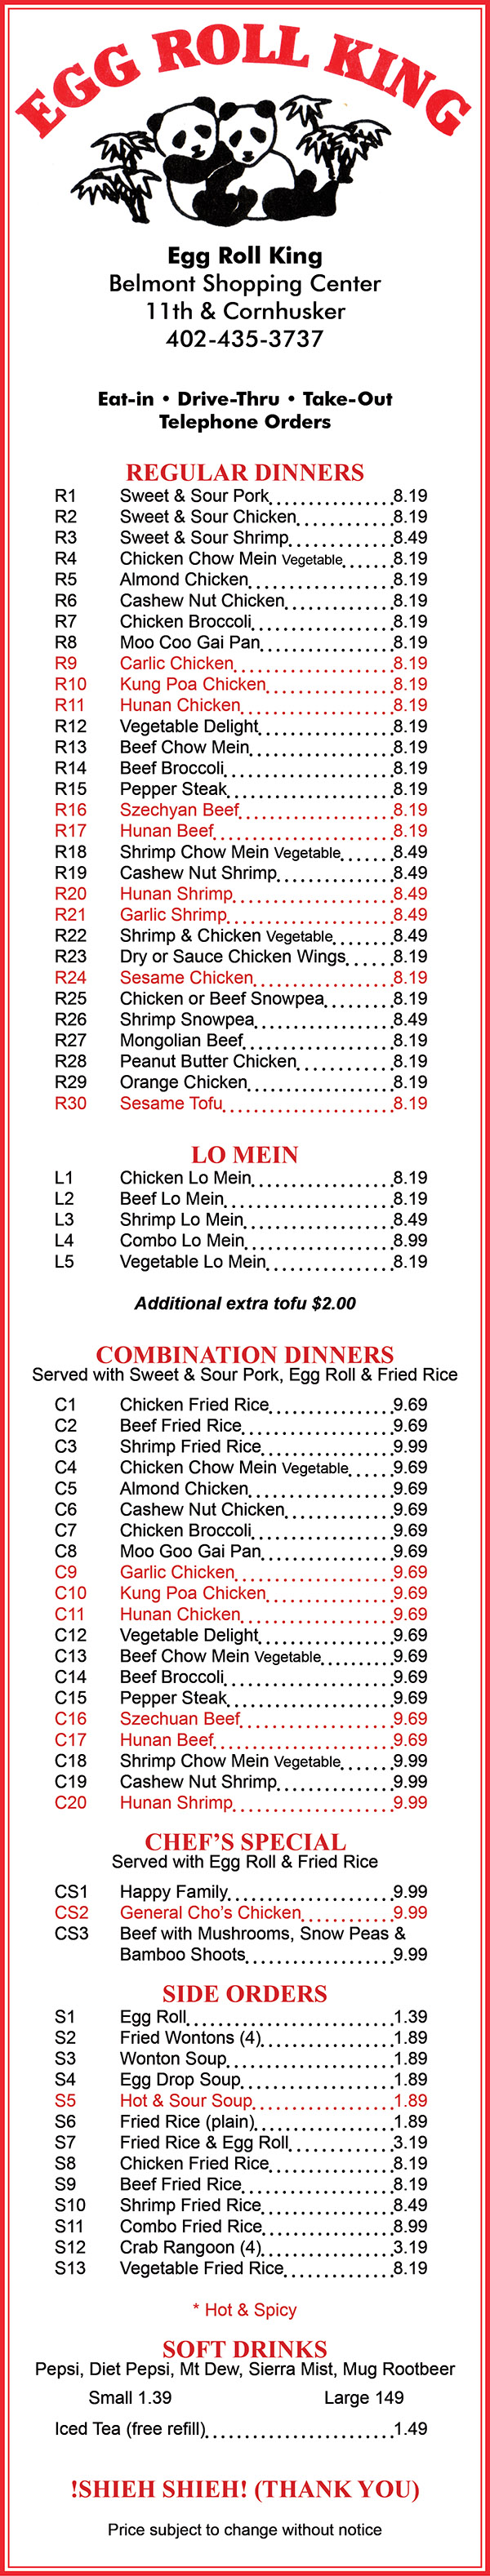 Egg Roll King (North) Menu - Lincoln NE - Provided by Metro Dining Delivery